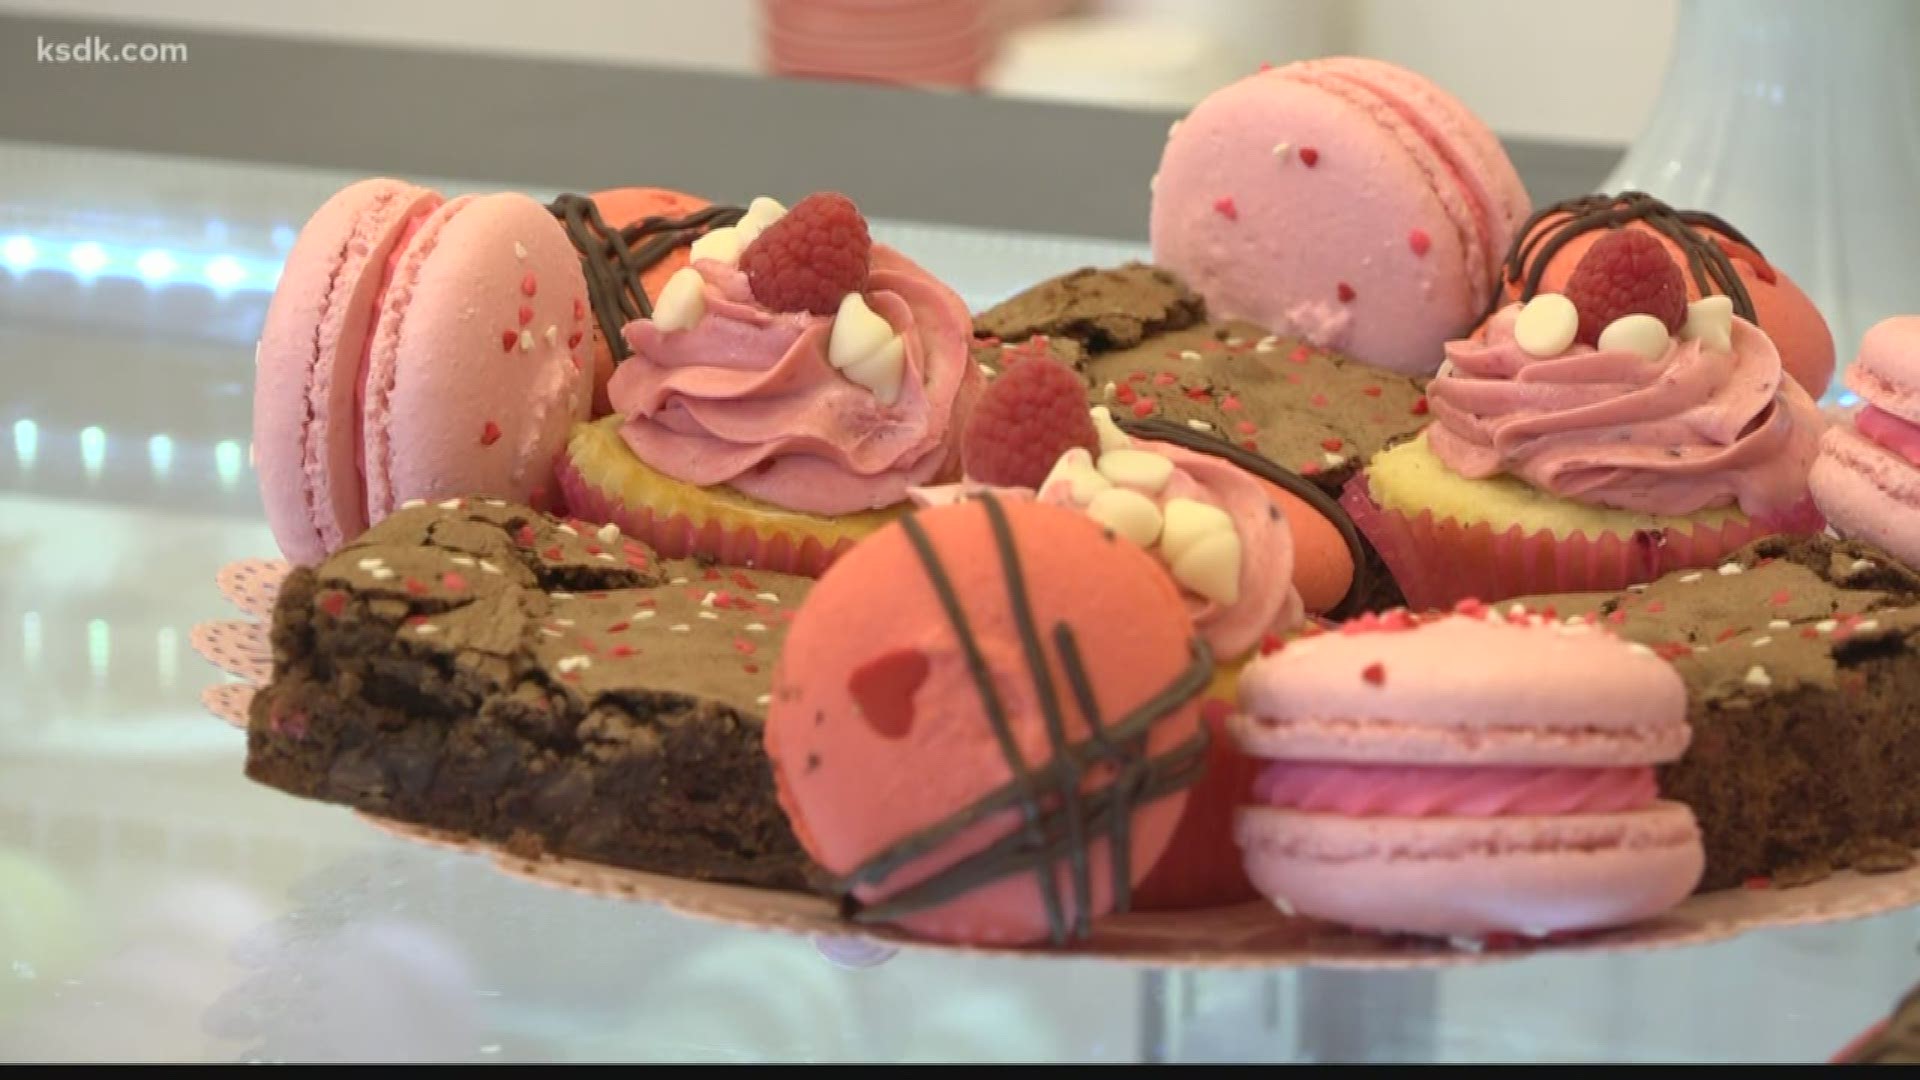 Sweetie Pie’s Bakery on Main is owned by 21-year-old Lydia Allen.